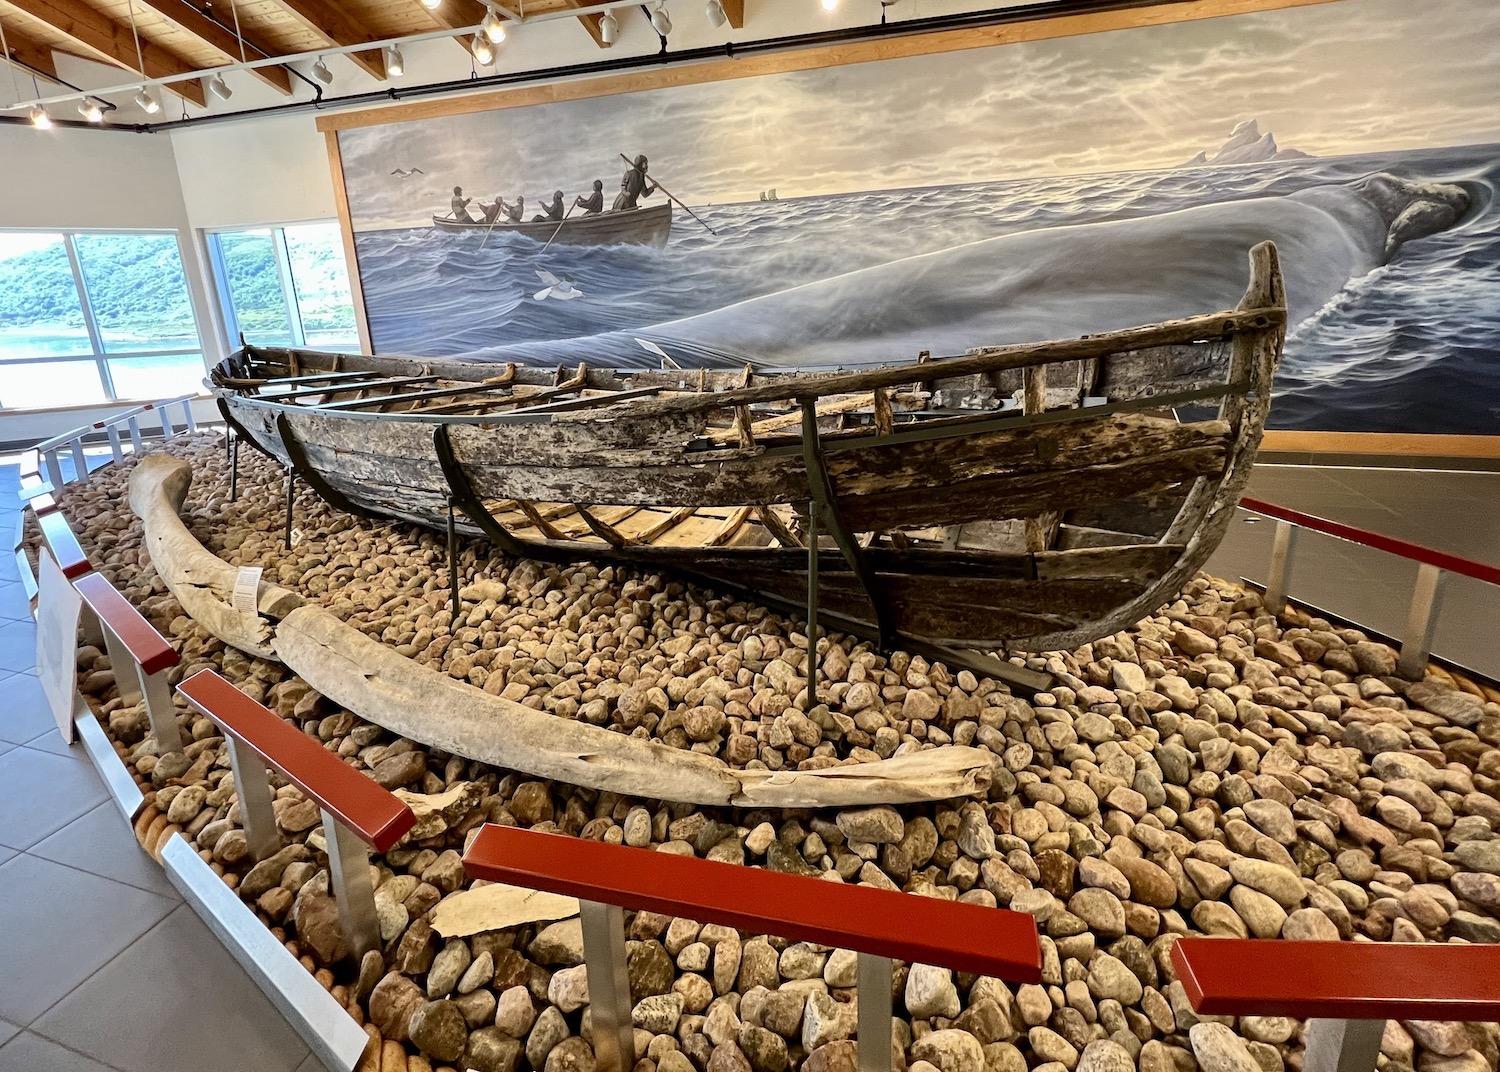 The chalupa, a Basque whaling boat, found in Red Bay Harbour is on display at Red Bay National Historic Site.